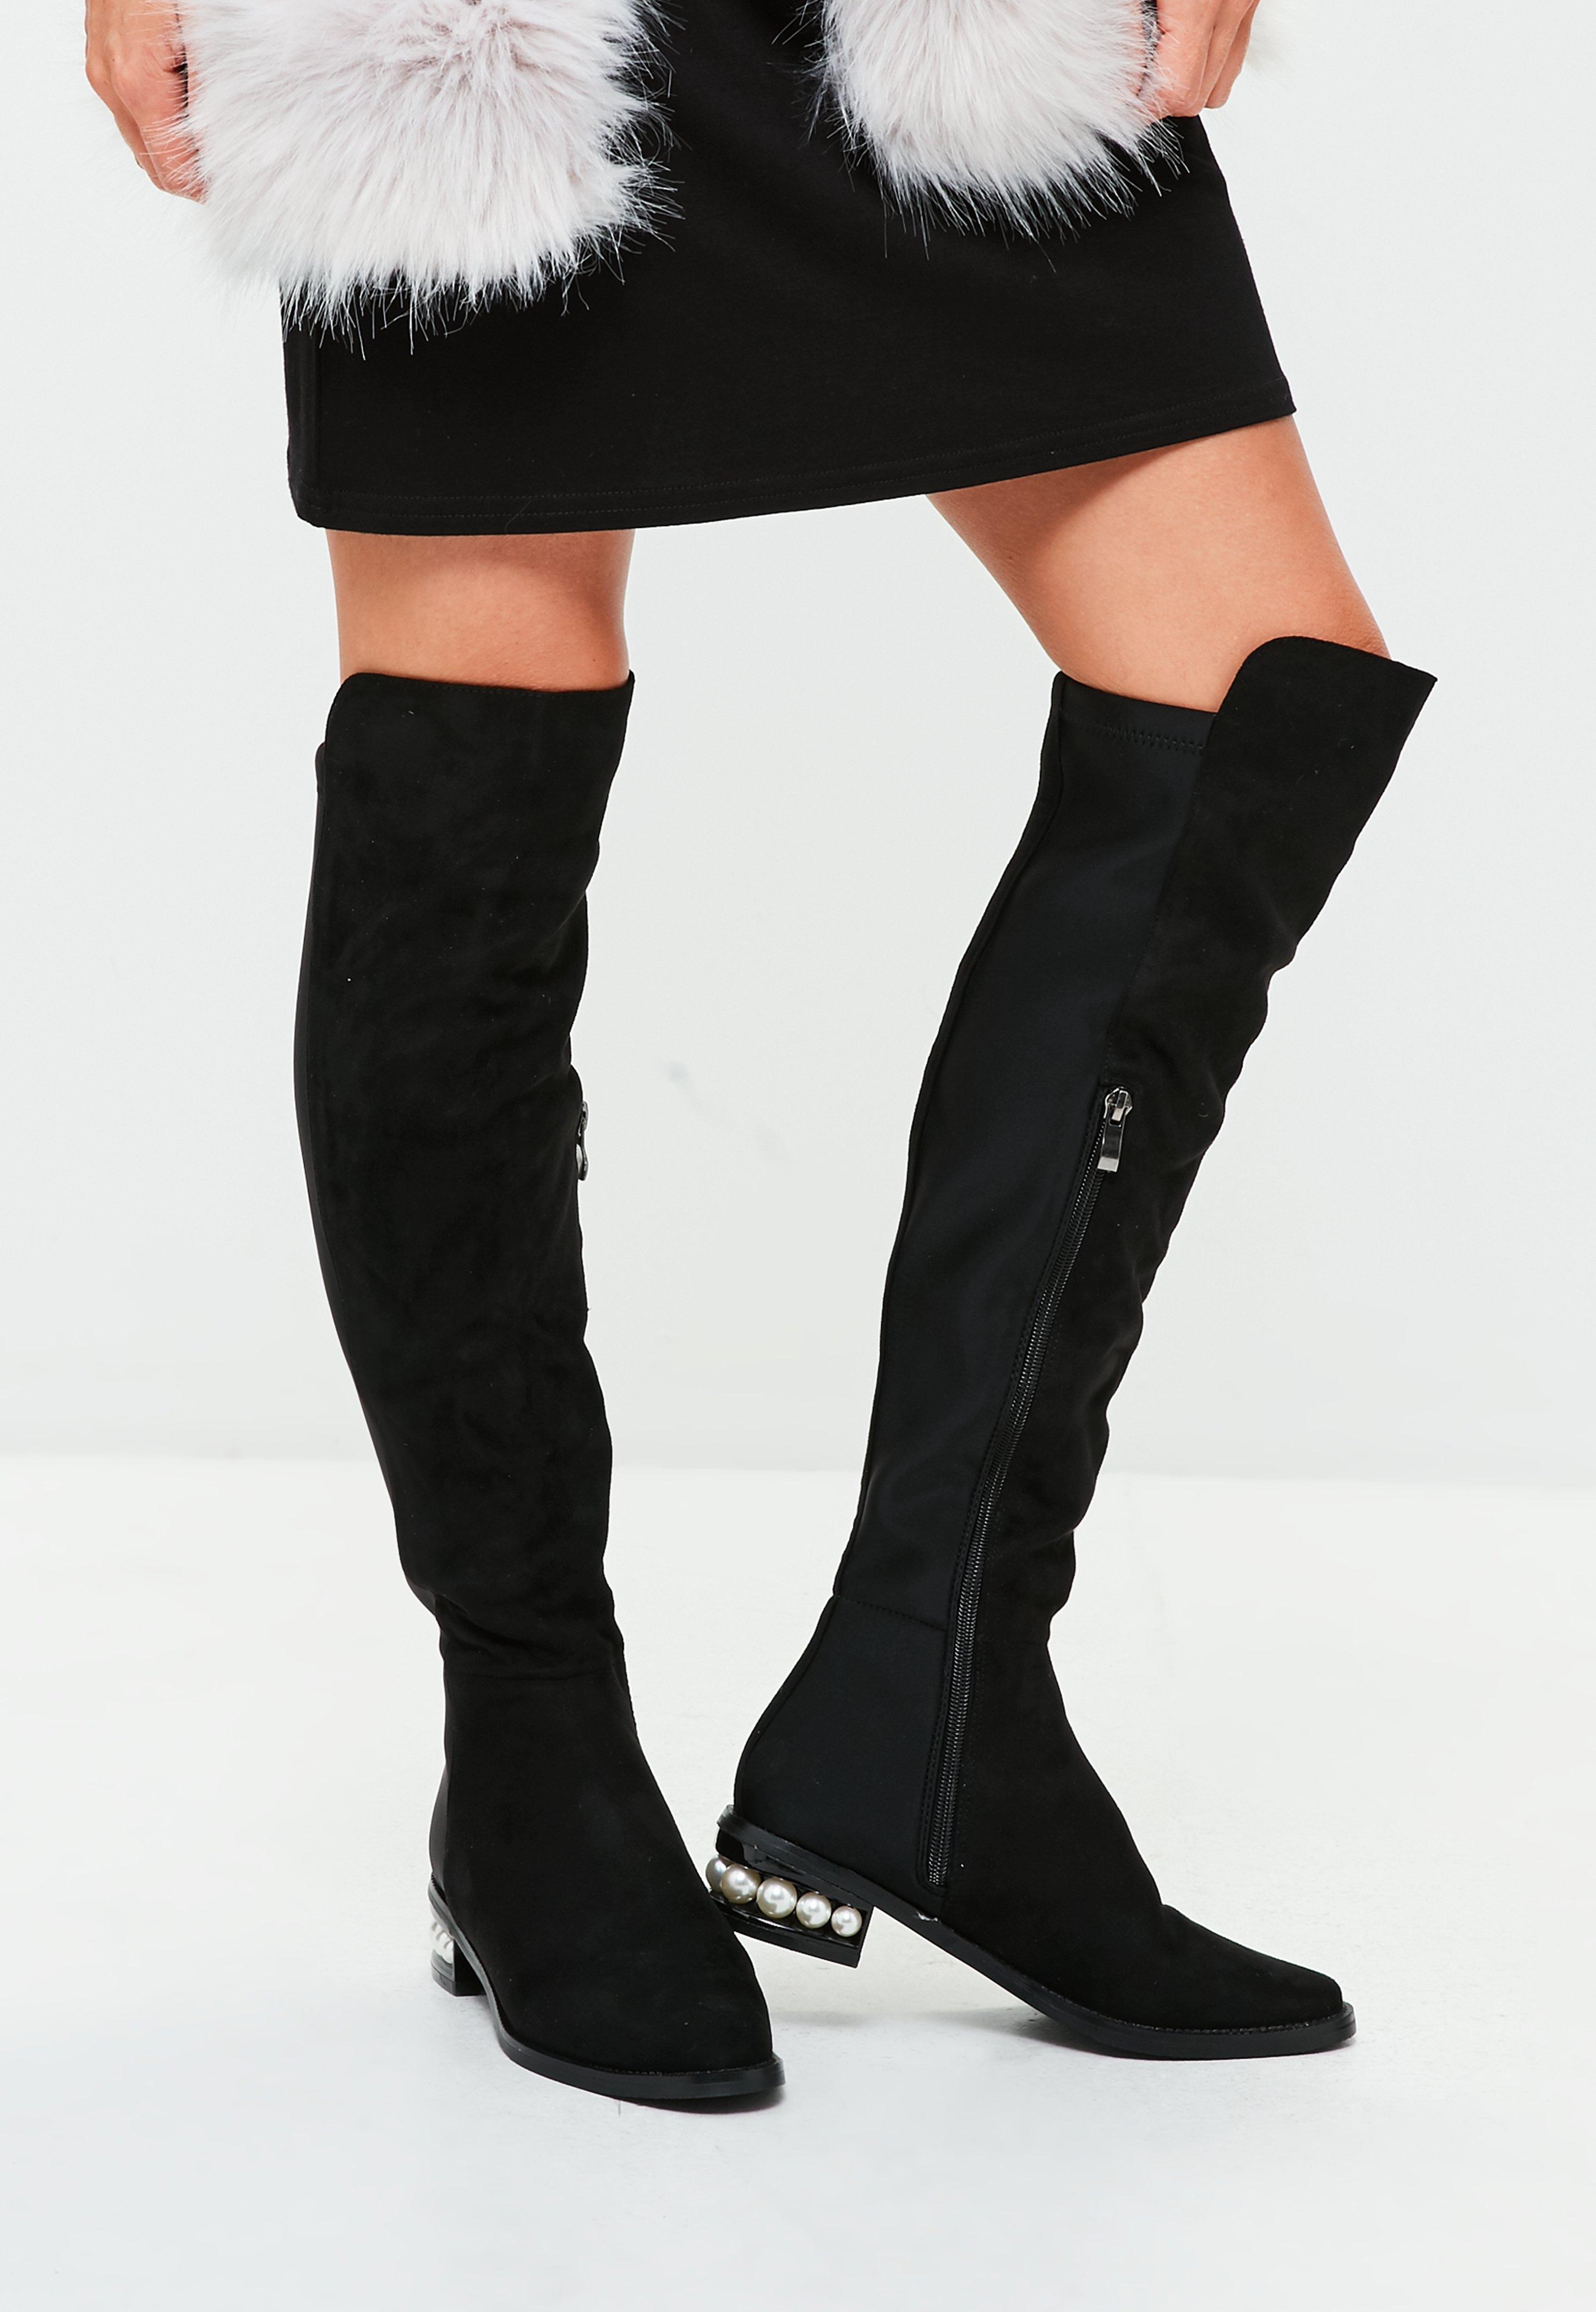 Missguided Black Pearl Heel Knee High Boots Lyst